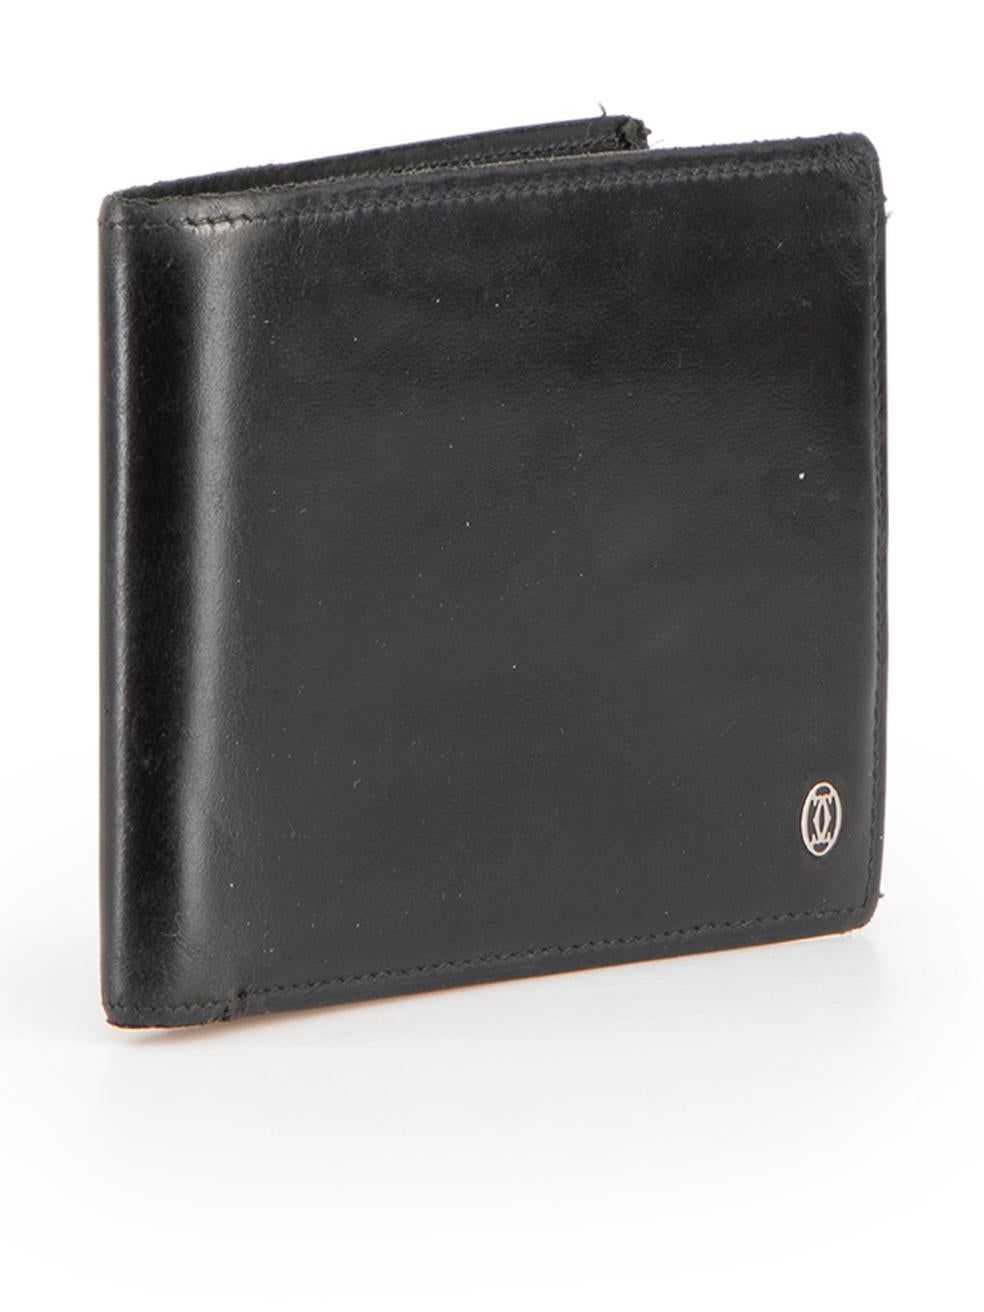 CONDITION is Good. General wear to wallet is evident. Moderate signs of wear to the corners, edges and rear with abrasions to the leather on this used Cartier designer resale item.
 
 Details
 Black
 Leather
 Wallet
 2x Notes holder
 Card holders
 
